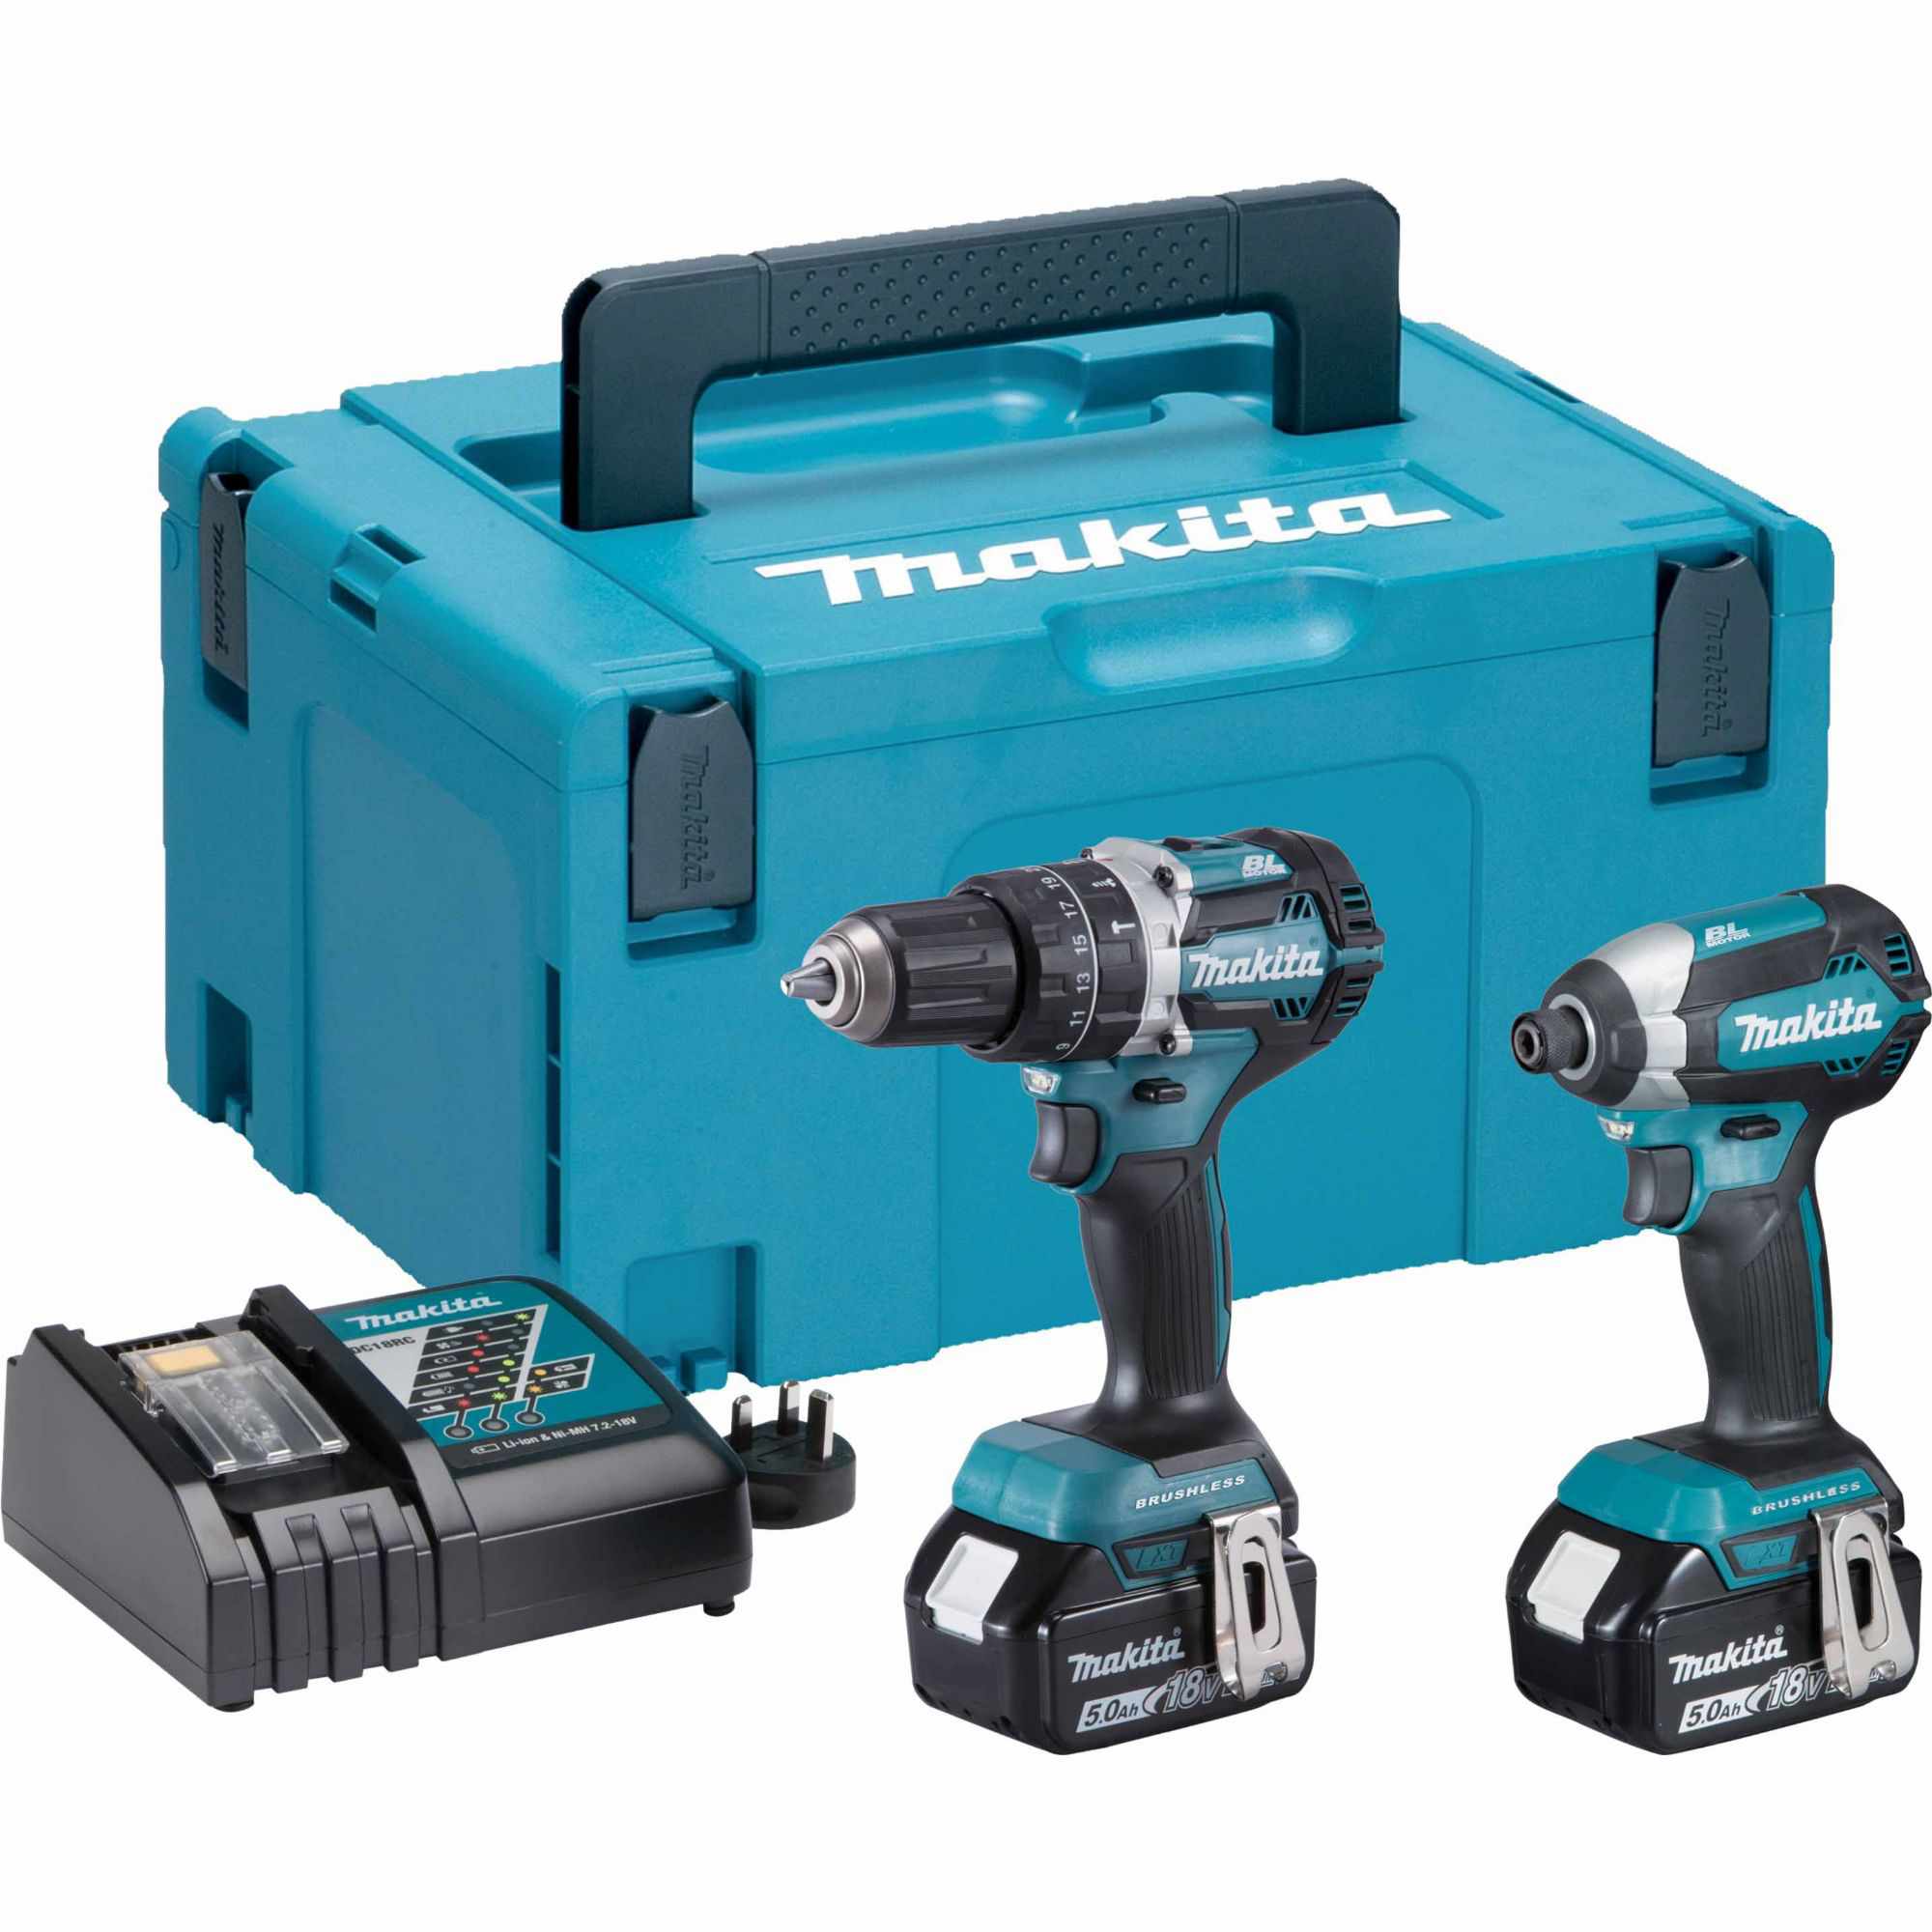 MAKITA DLX2180TJ 18v Twin with Batteries - ToolStore UK